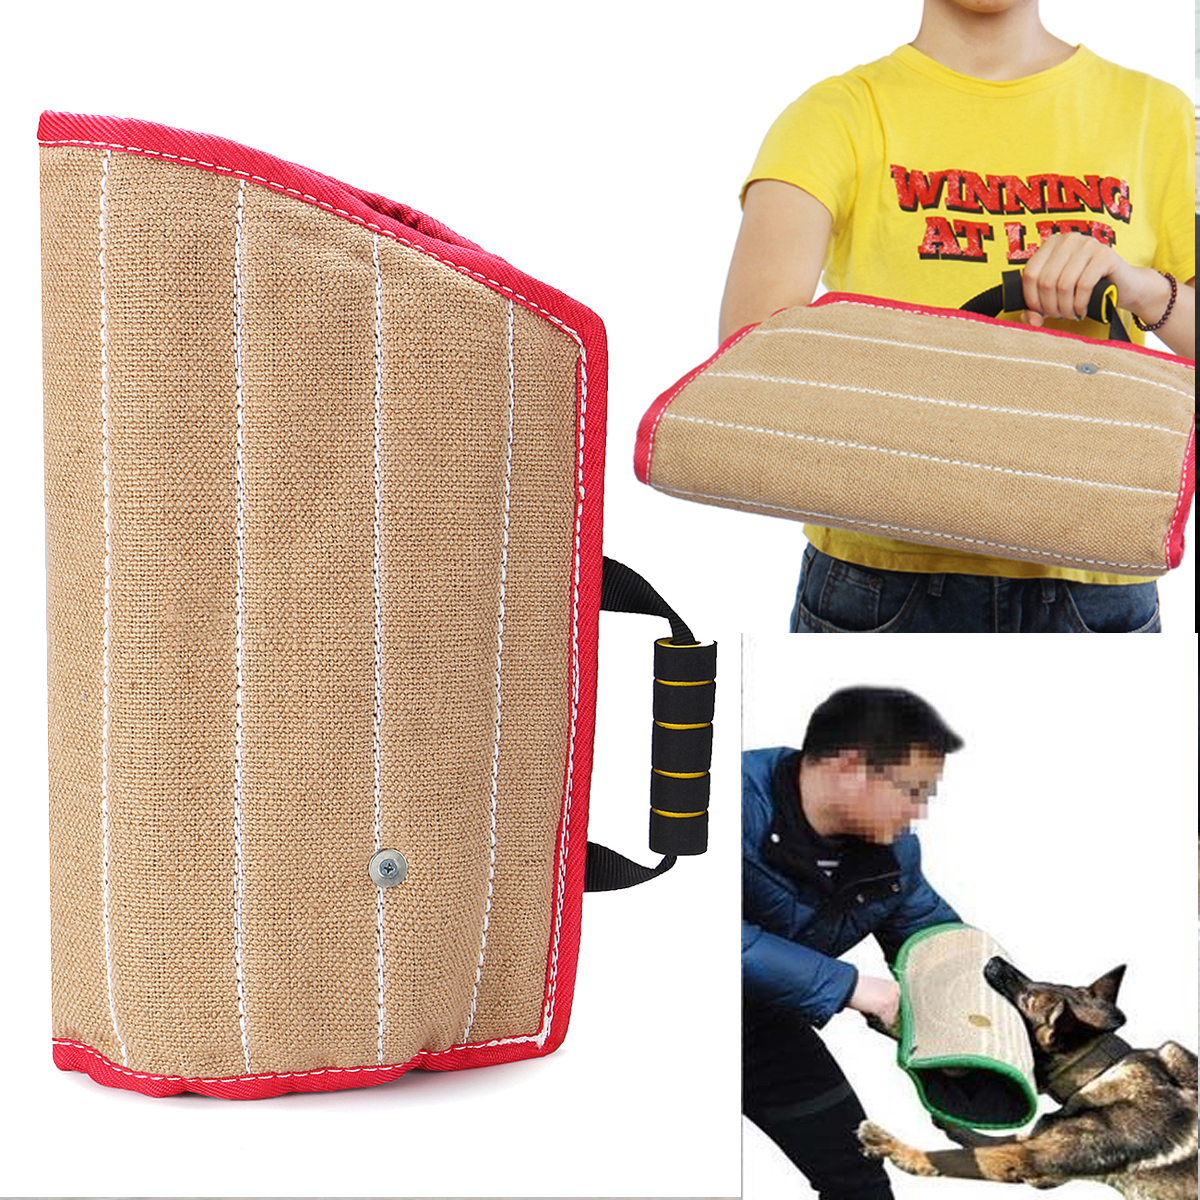 Jute-Thickened-Pet-Dog-Training-Arm-Sleeve-With-Handle-Durable-Stable-Dog-Bite-Sleeve-Arm-Protection-1718725-1